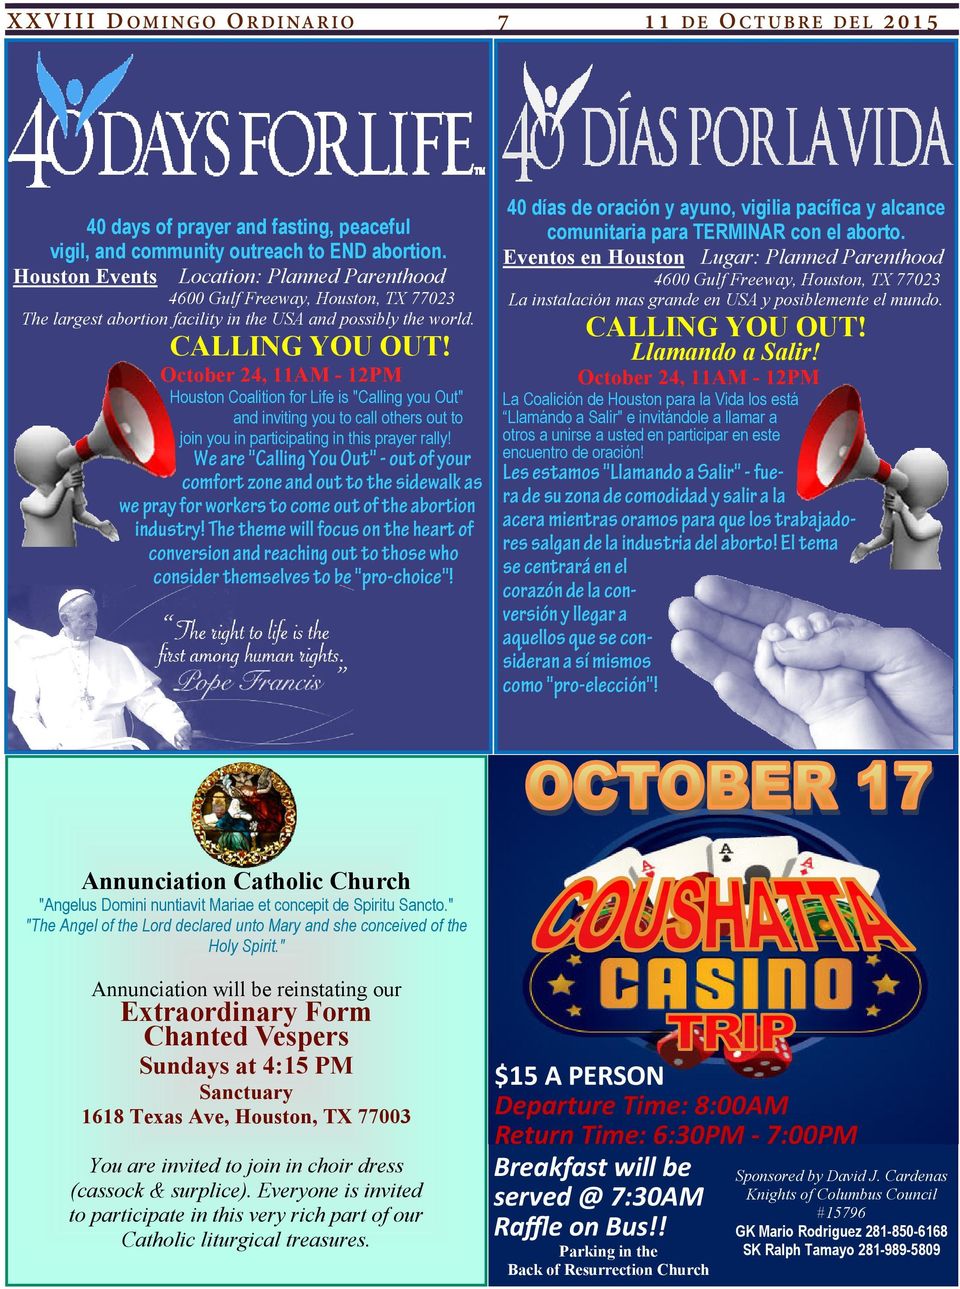 October 24, 11AM - 12PM Houston Coalition for Life is "Calling you Out" and inviting you to call others out to join you in participating in this prayer rally!